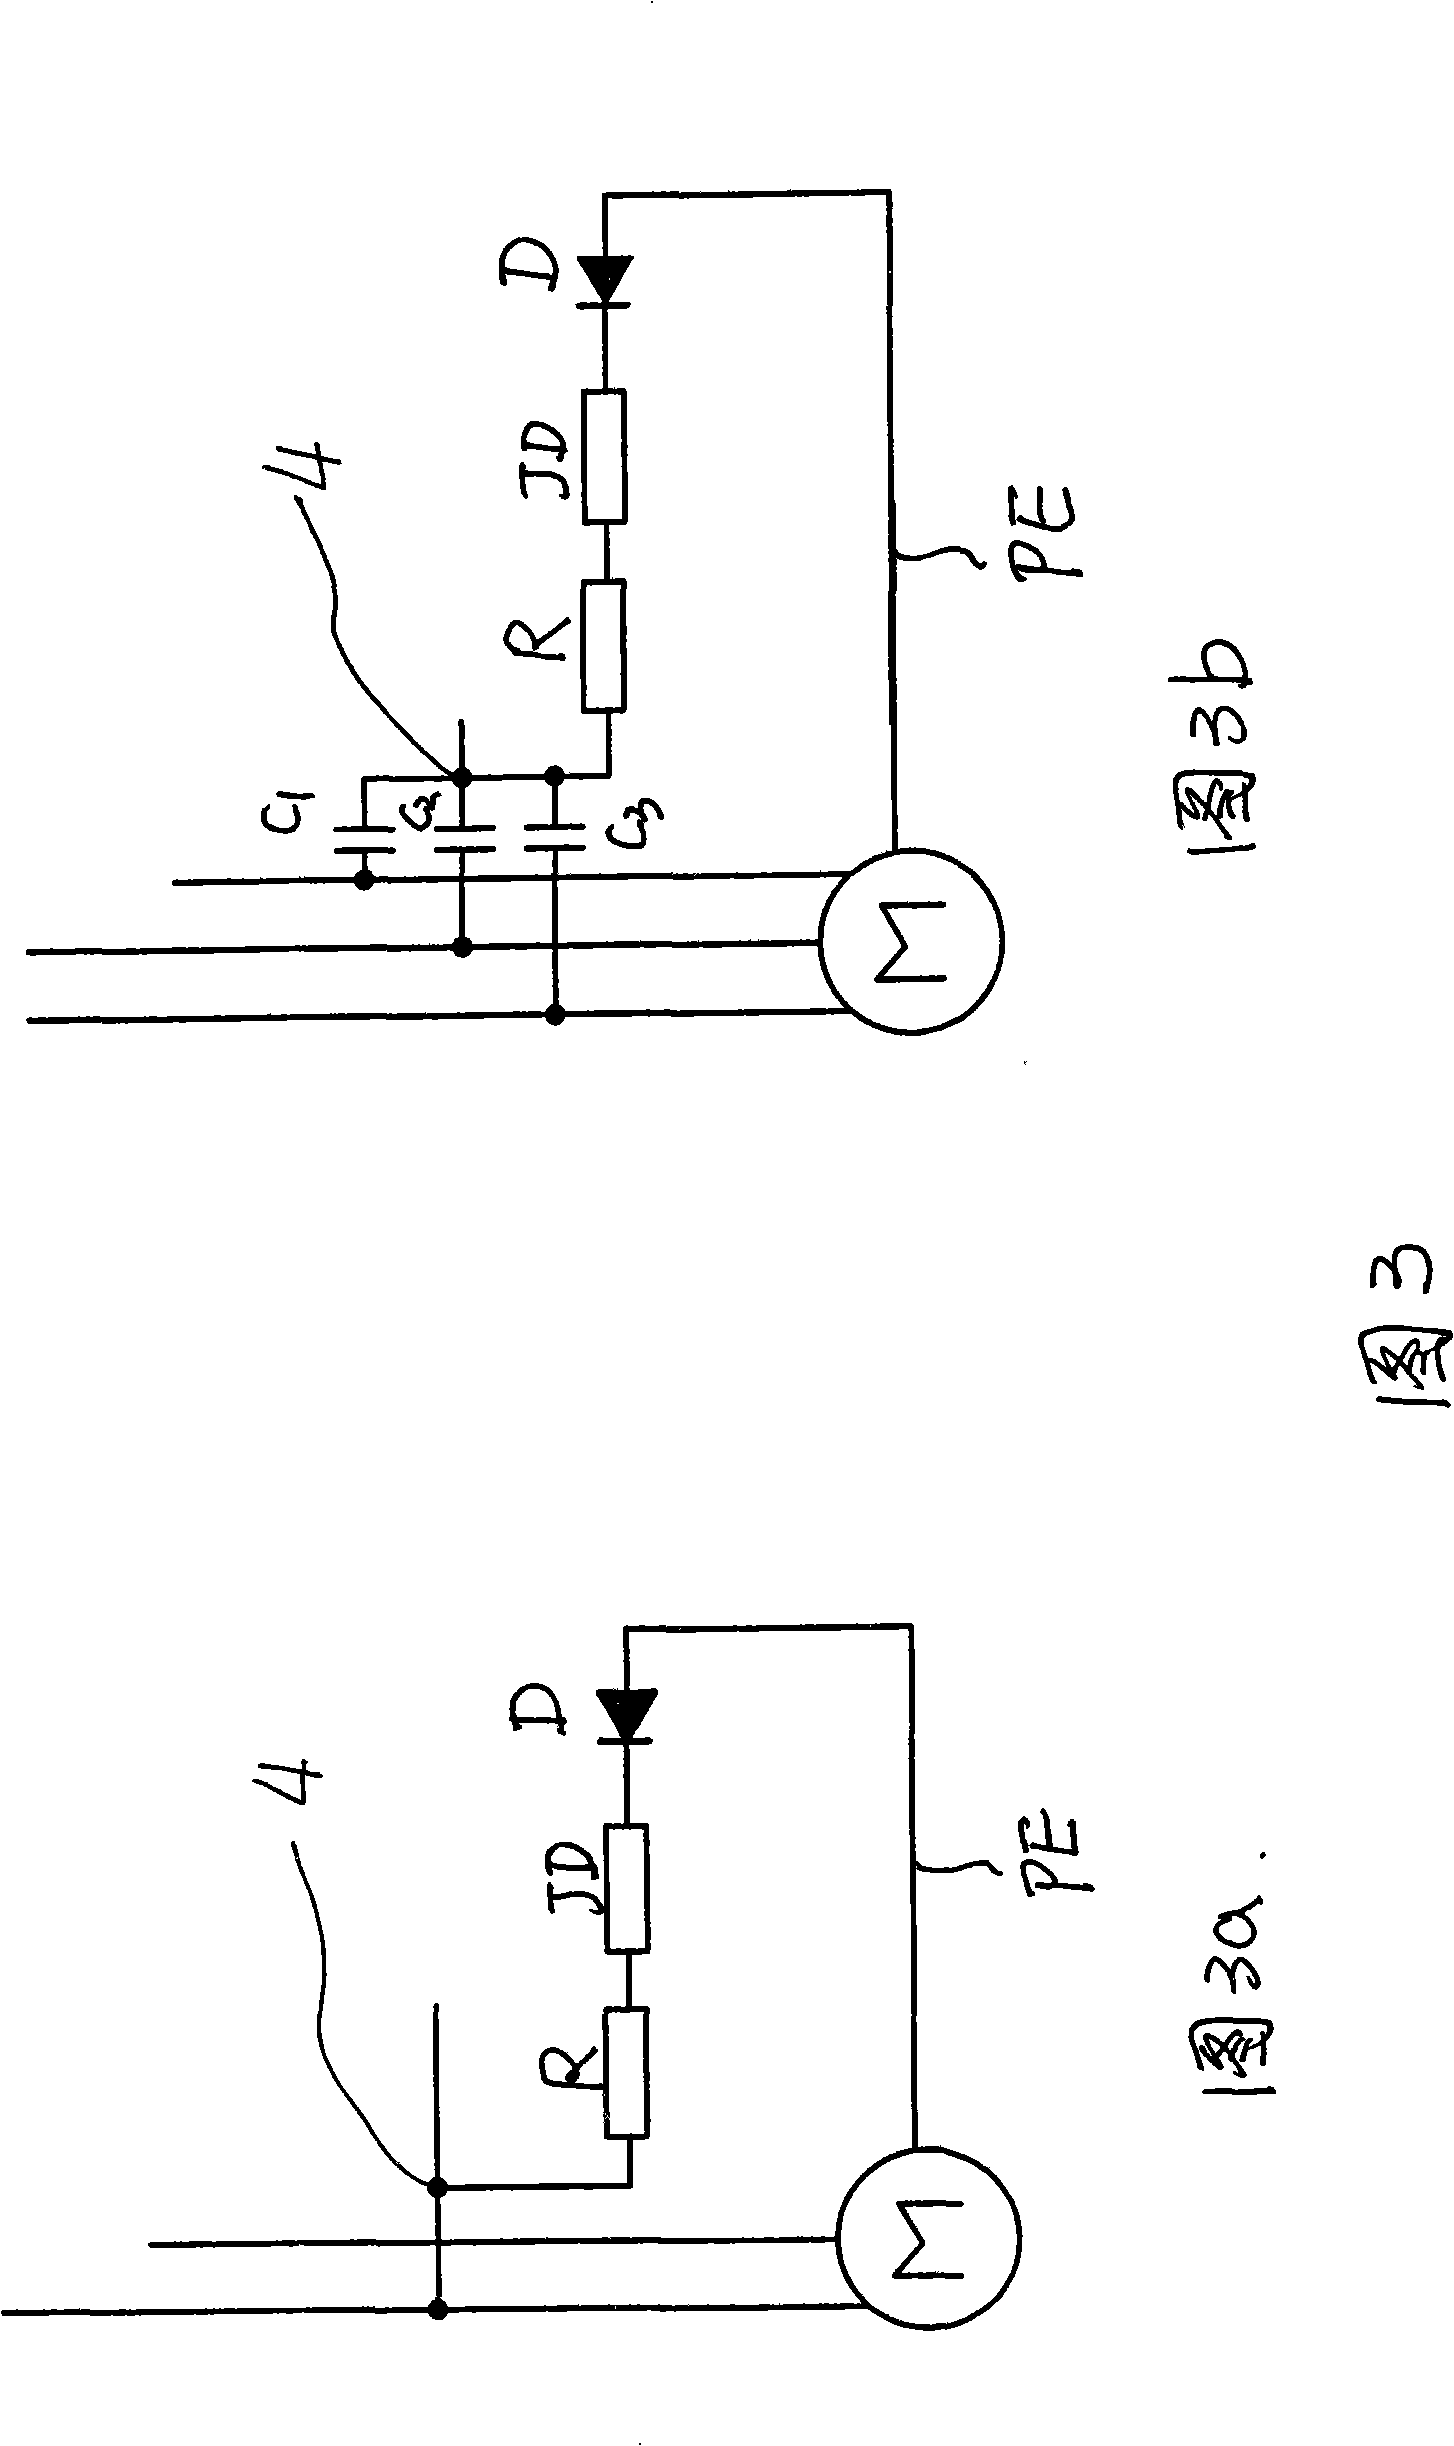 Current-limiting arc-extinguishing shunted exciter tripping type earthing short circuit protection device